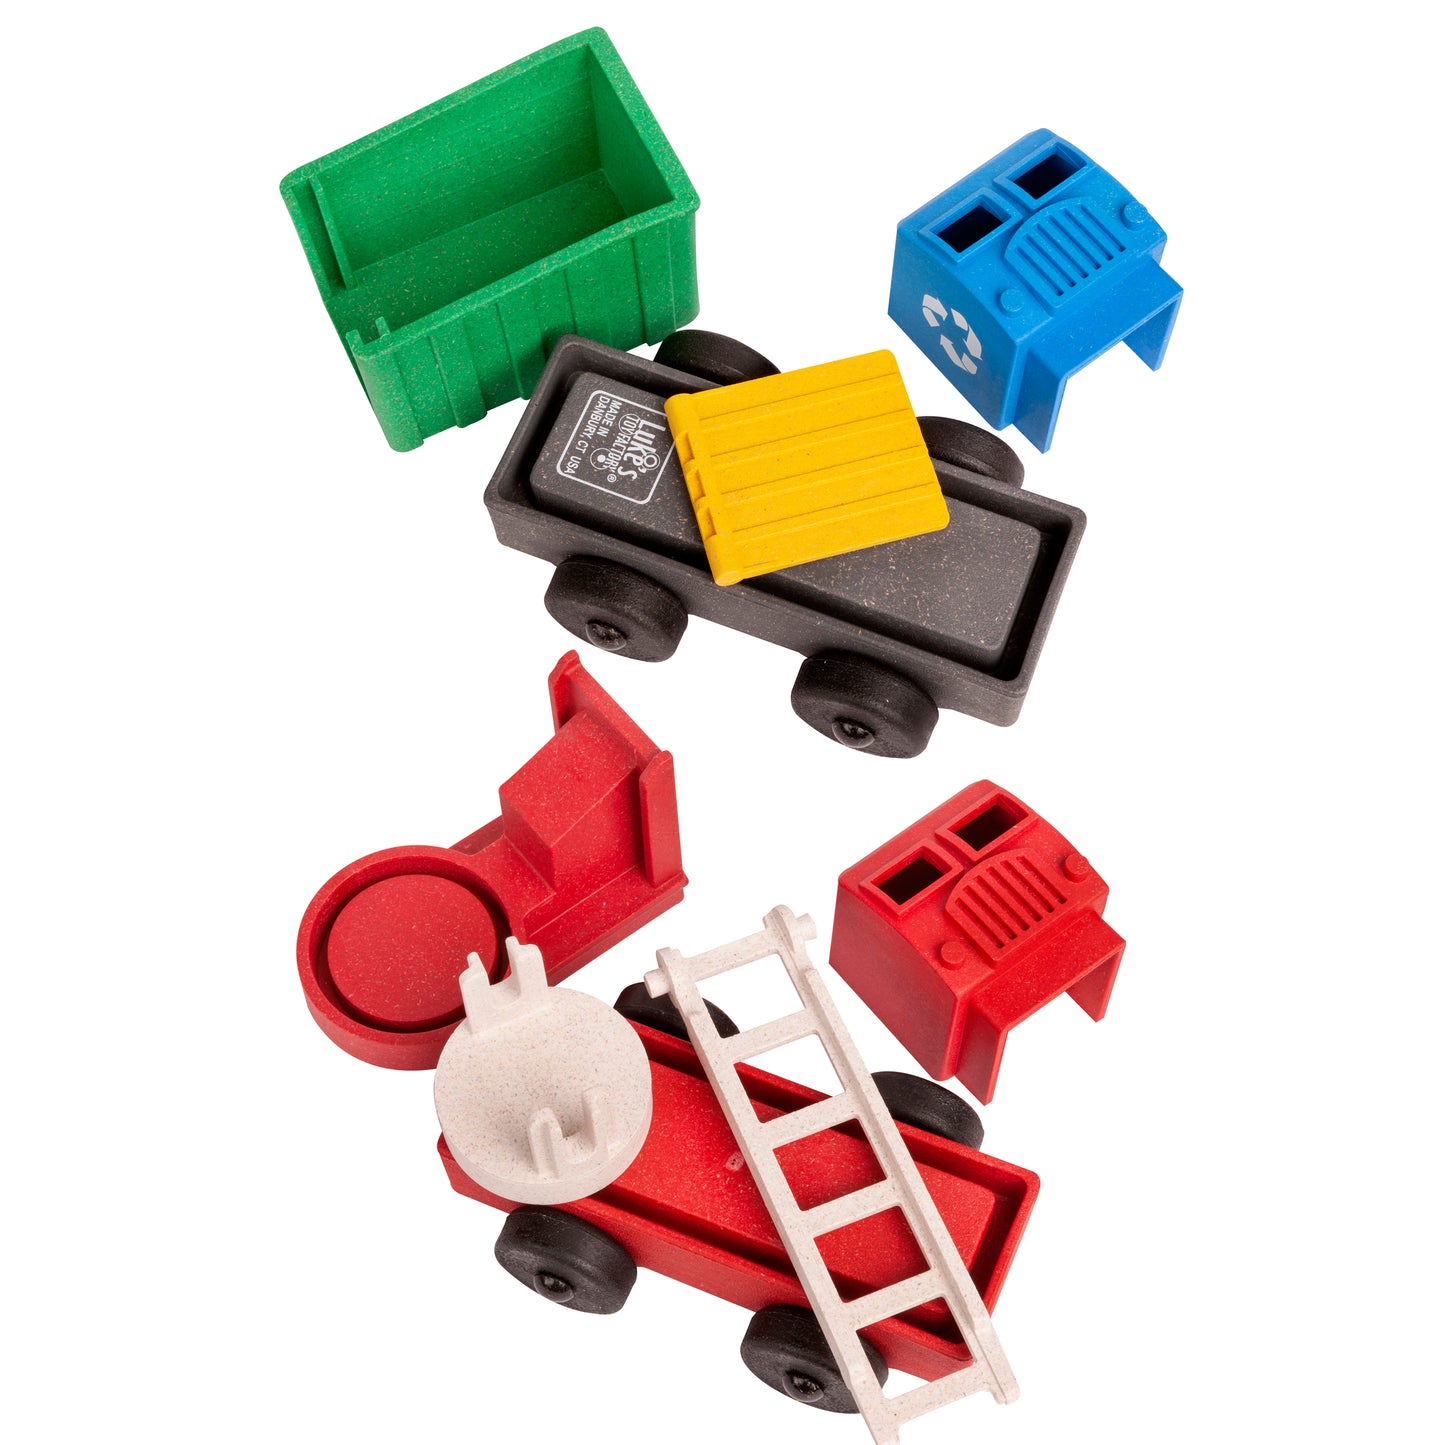 Puzzle parts of Luke's Toy Factory Recycling truck toy and firetruck toy